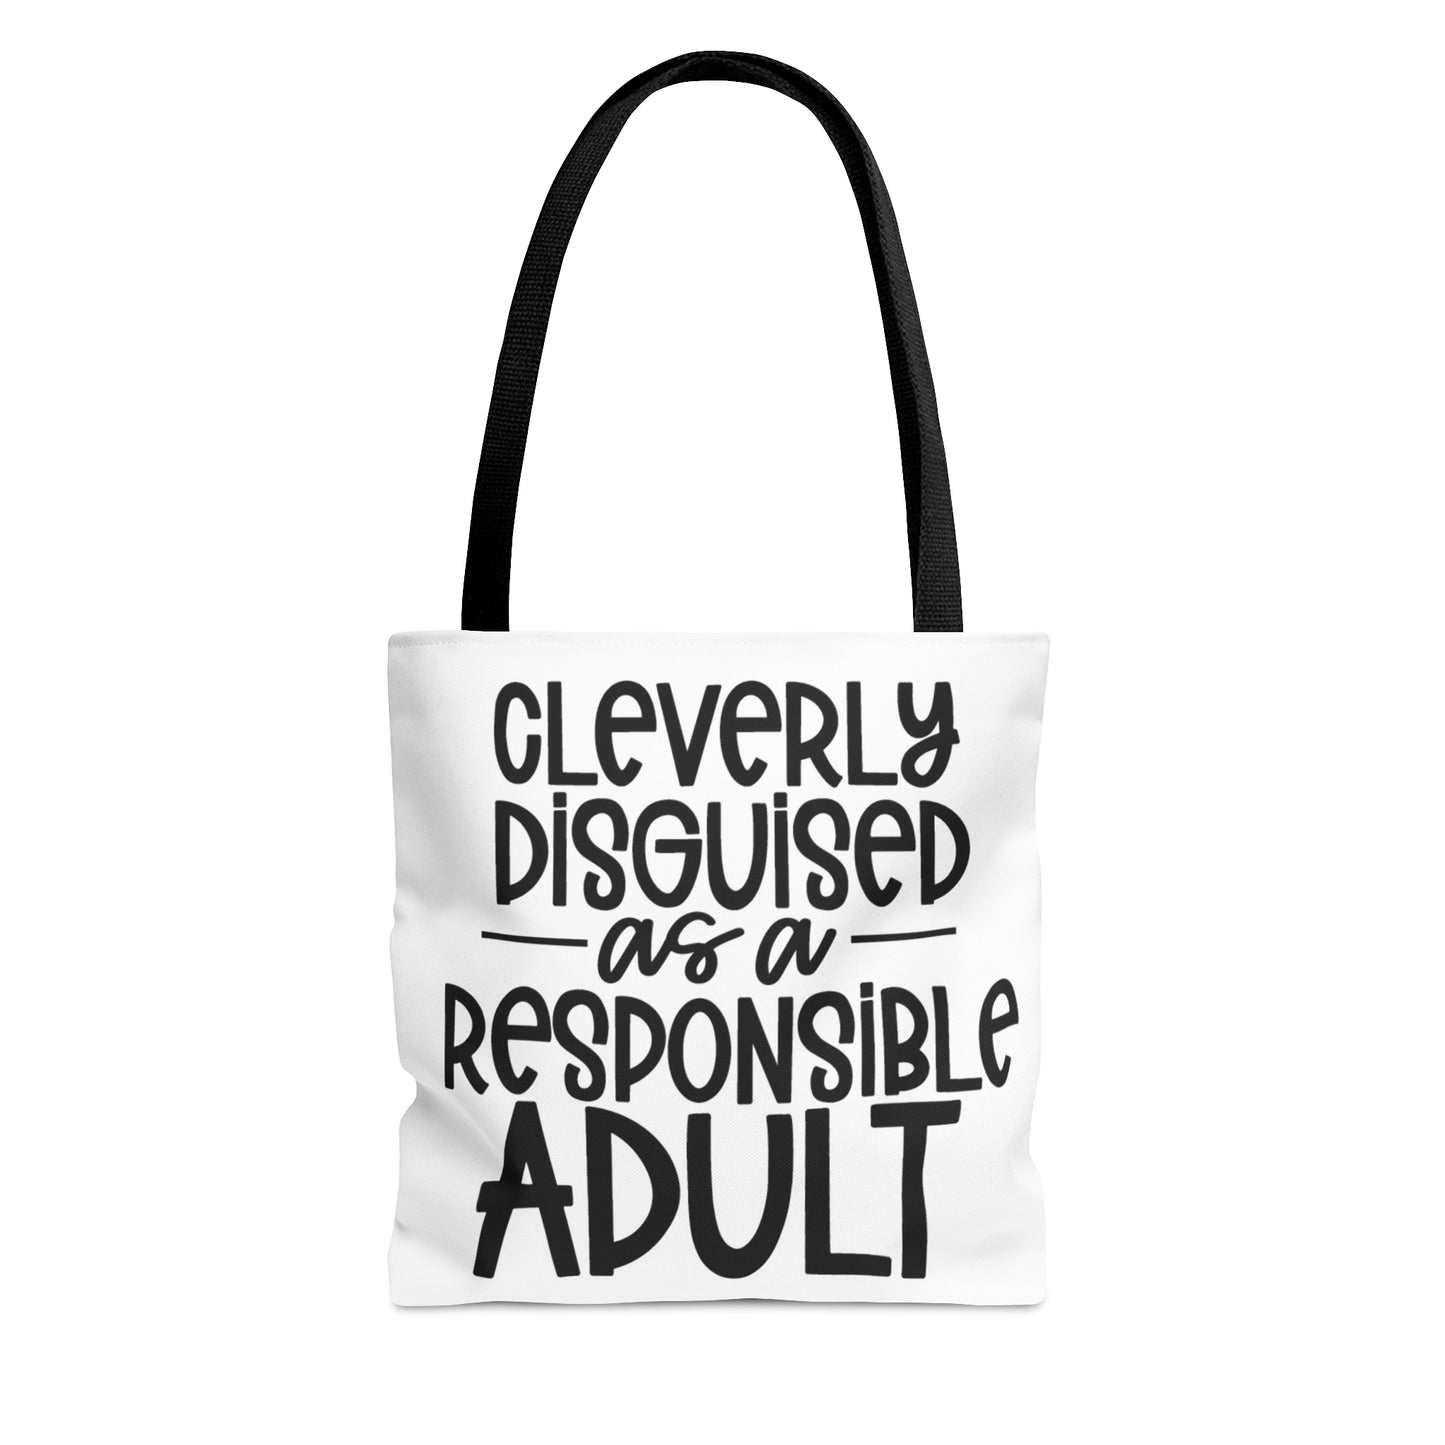 Clearly Disguised Tote Bag (AOP)